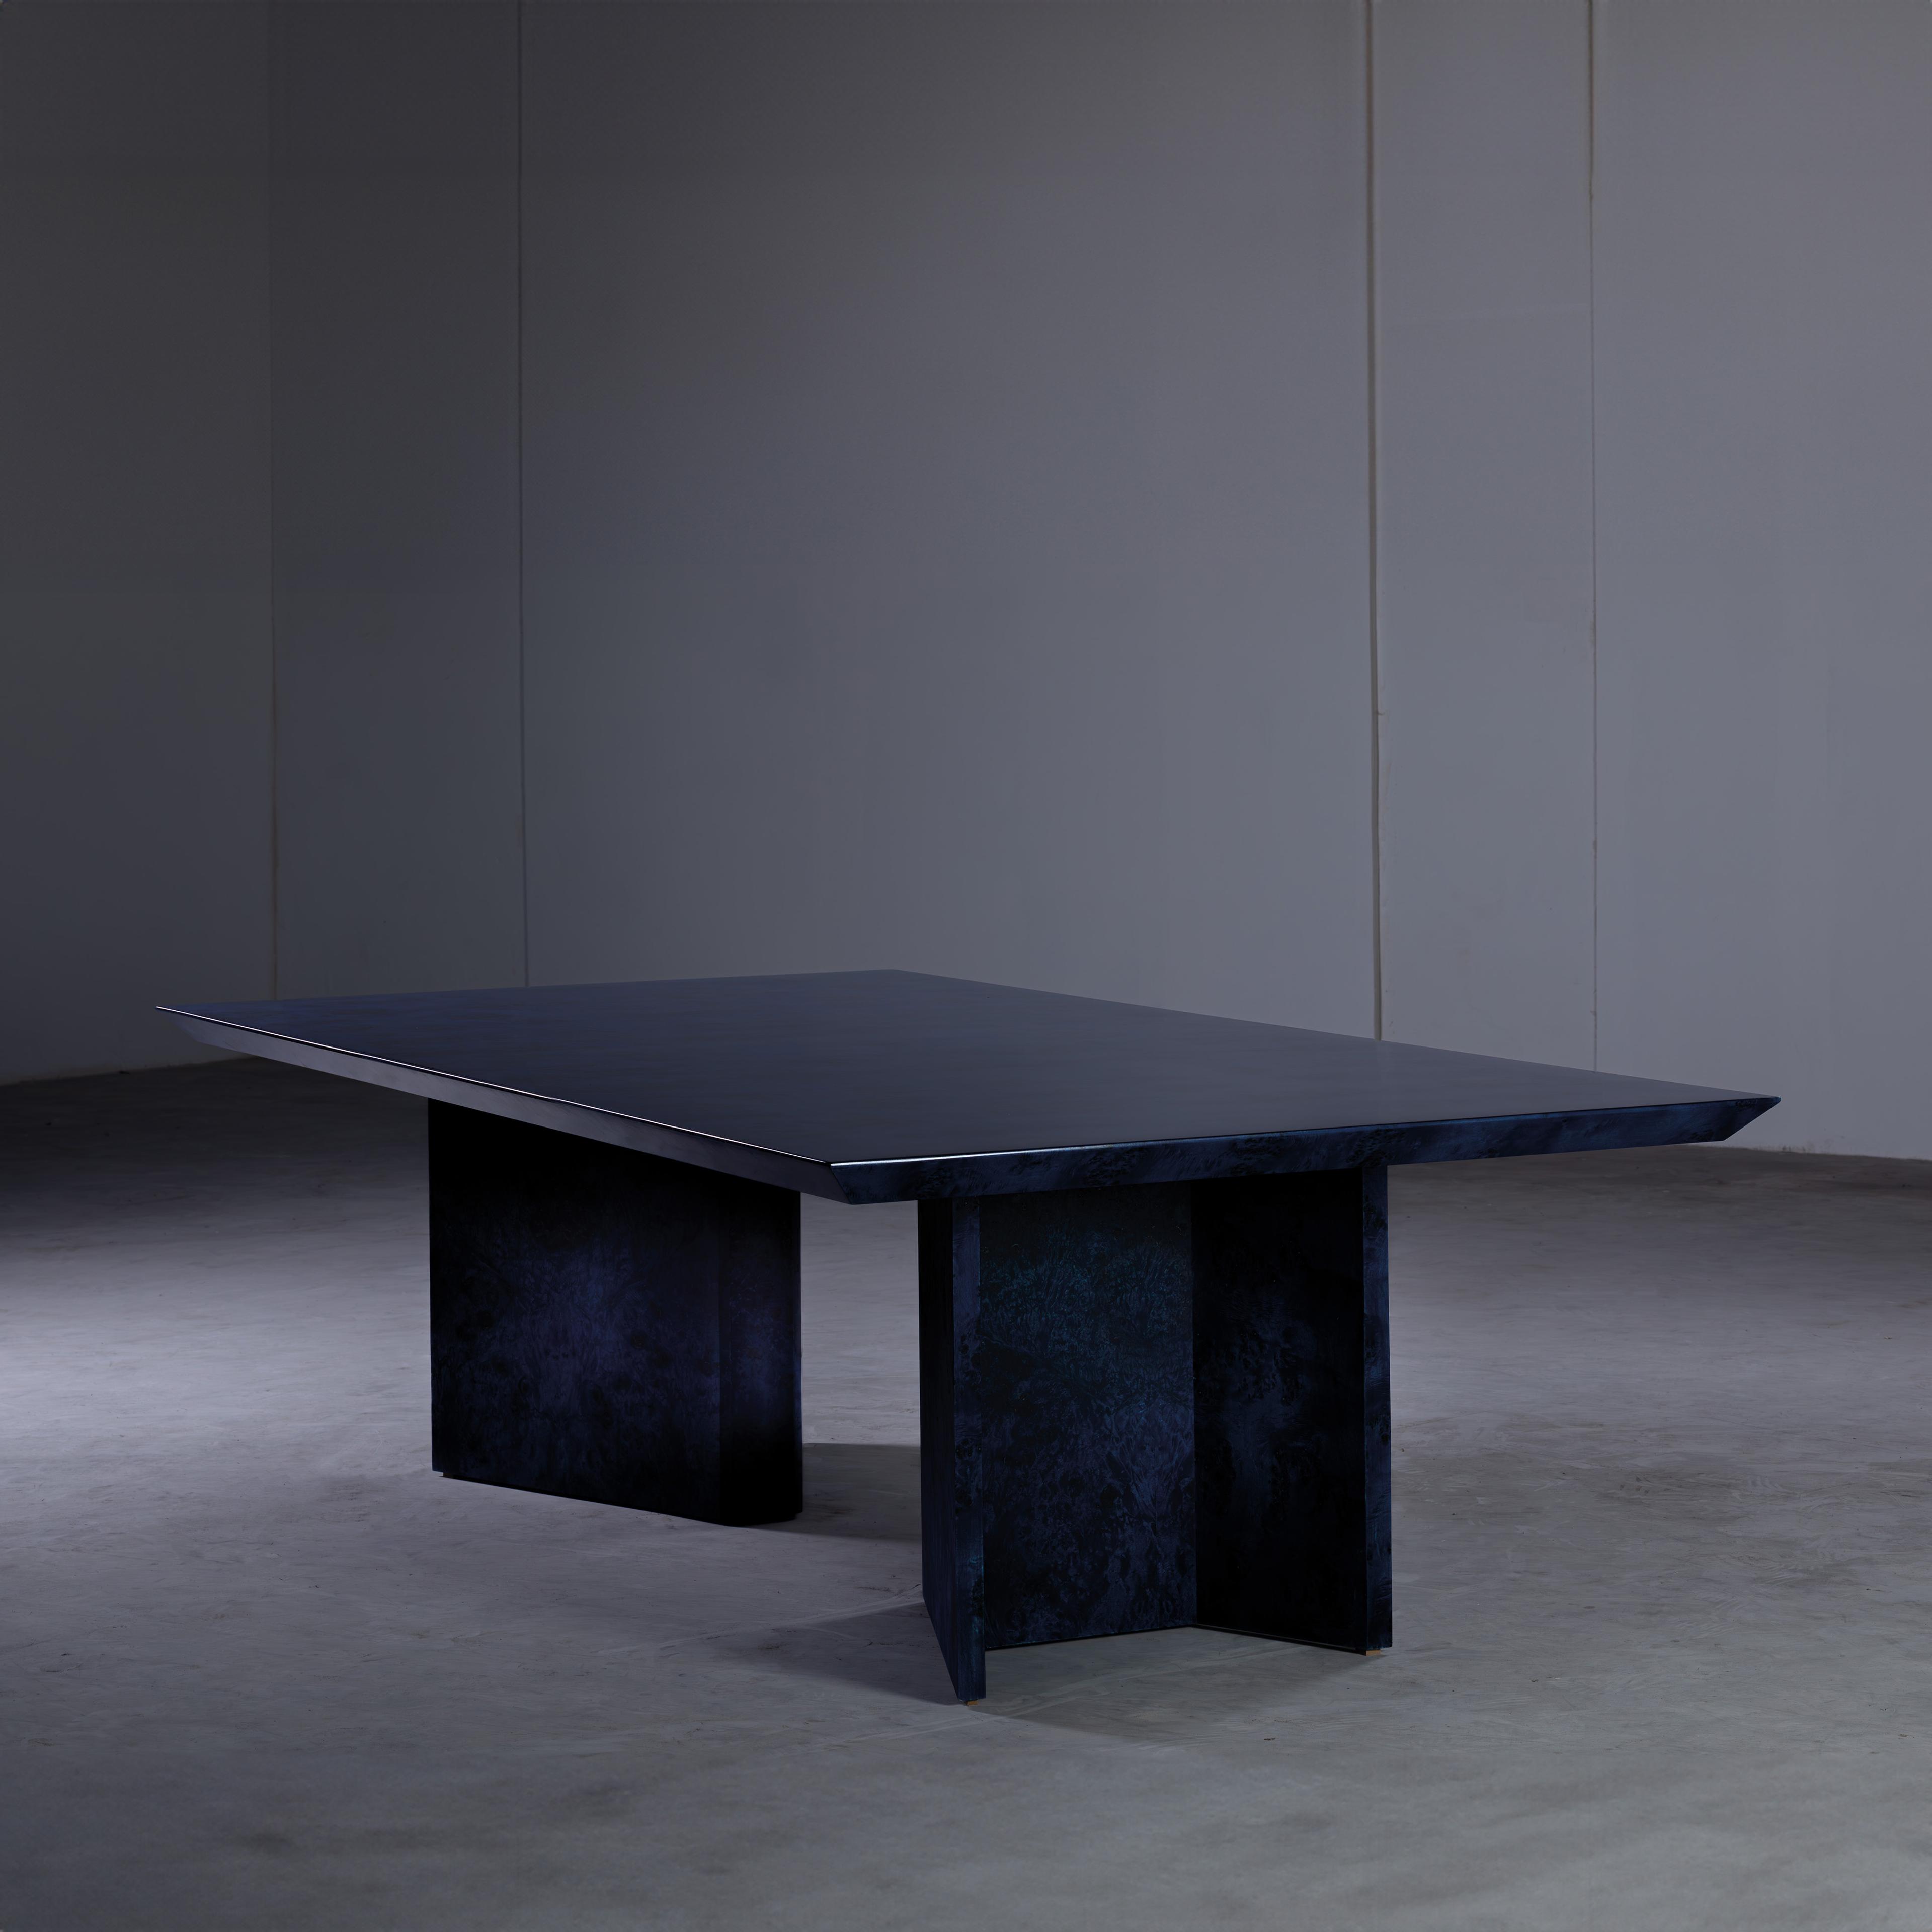 Blue Lacquered Dining Table by Hamza Kadiri at Ateliers Courbet